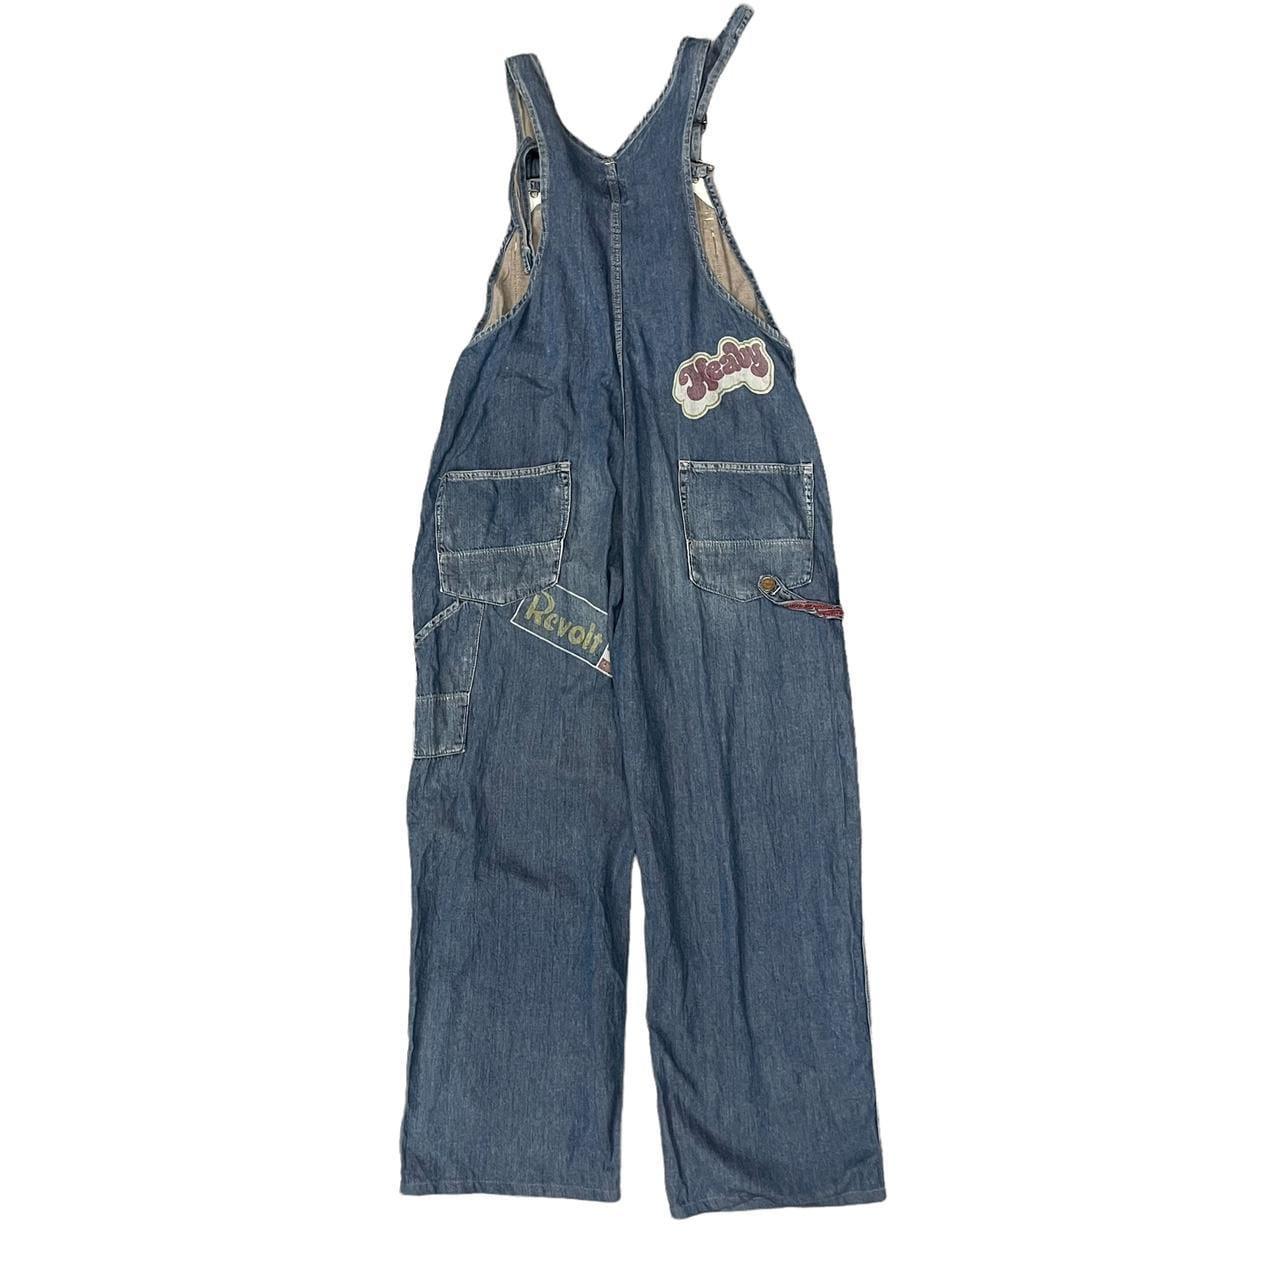 Vintage Hysteric Glamour dungarees overalls size W34 - Known Source